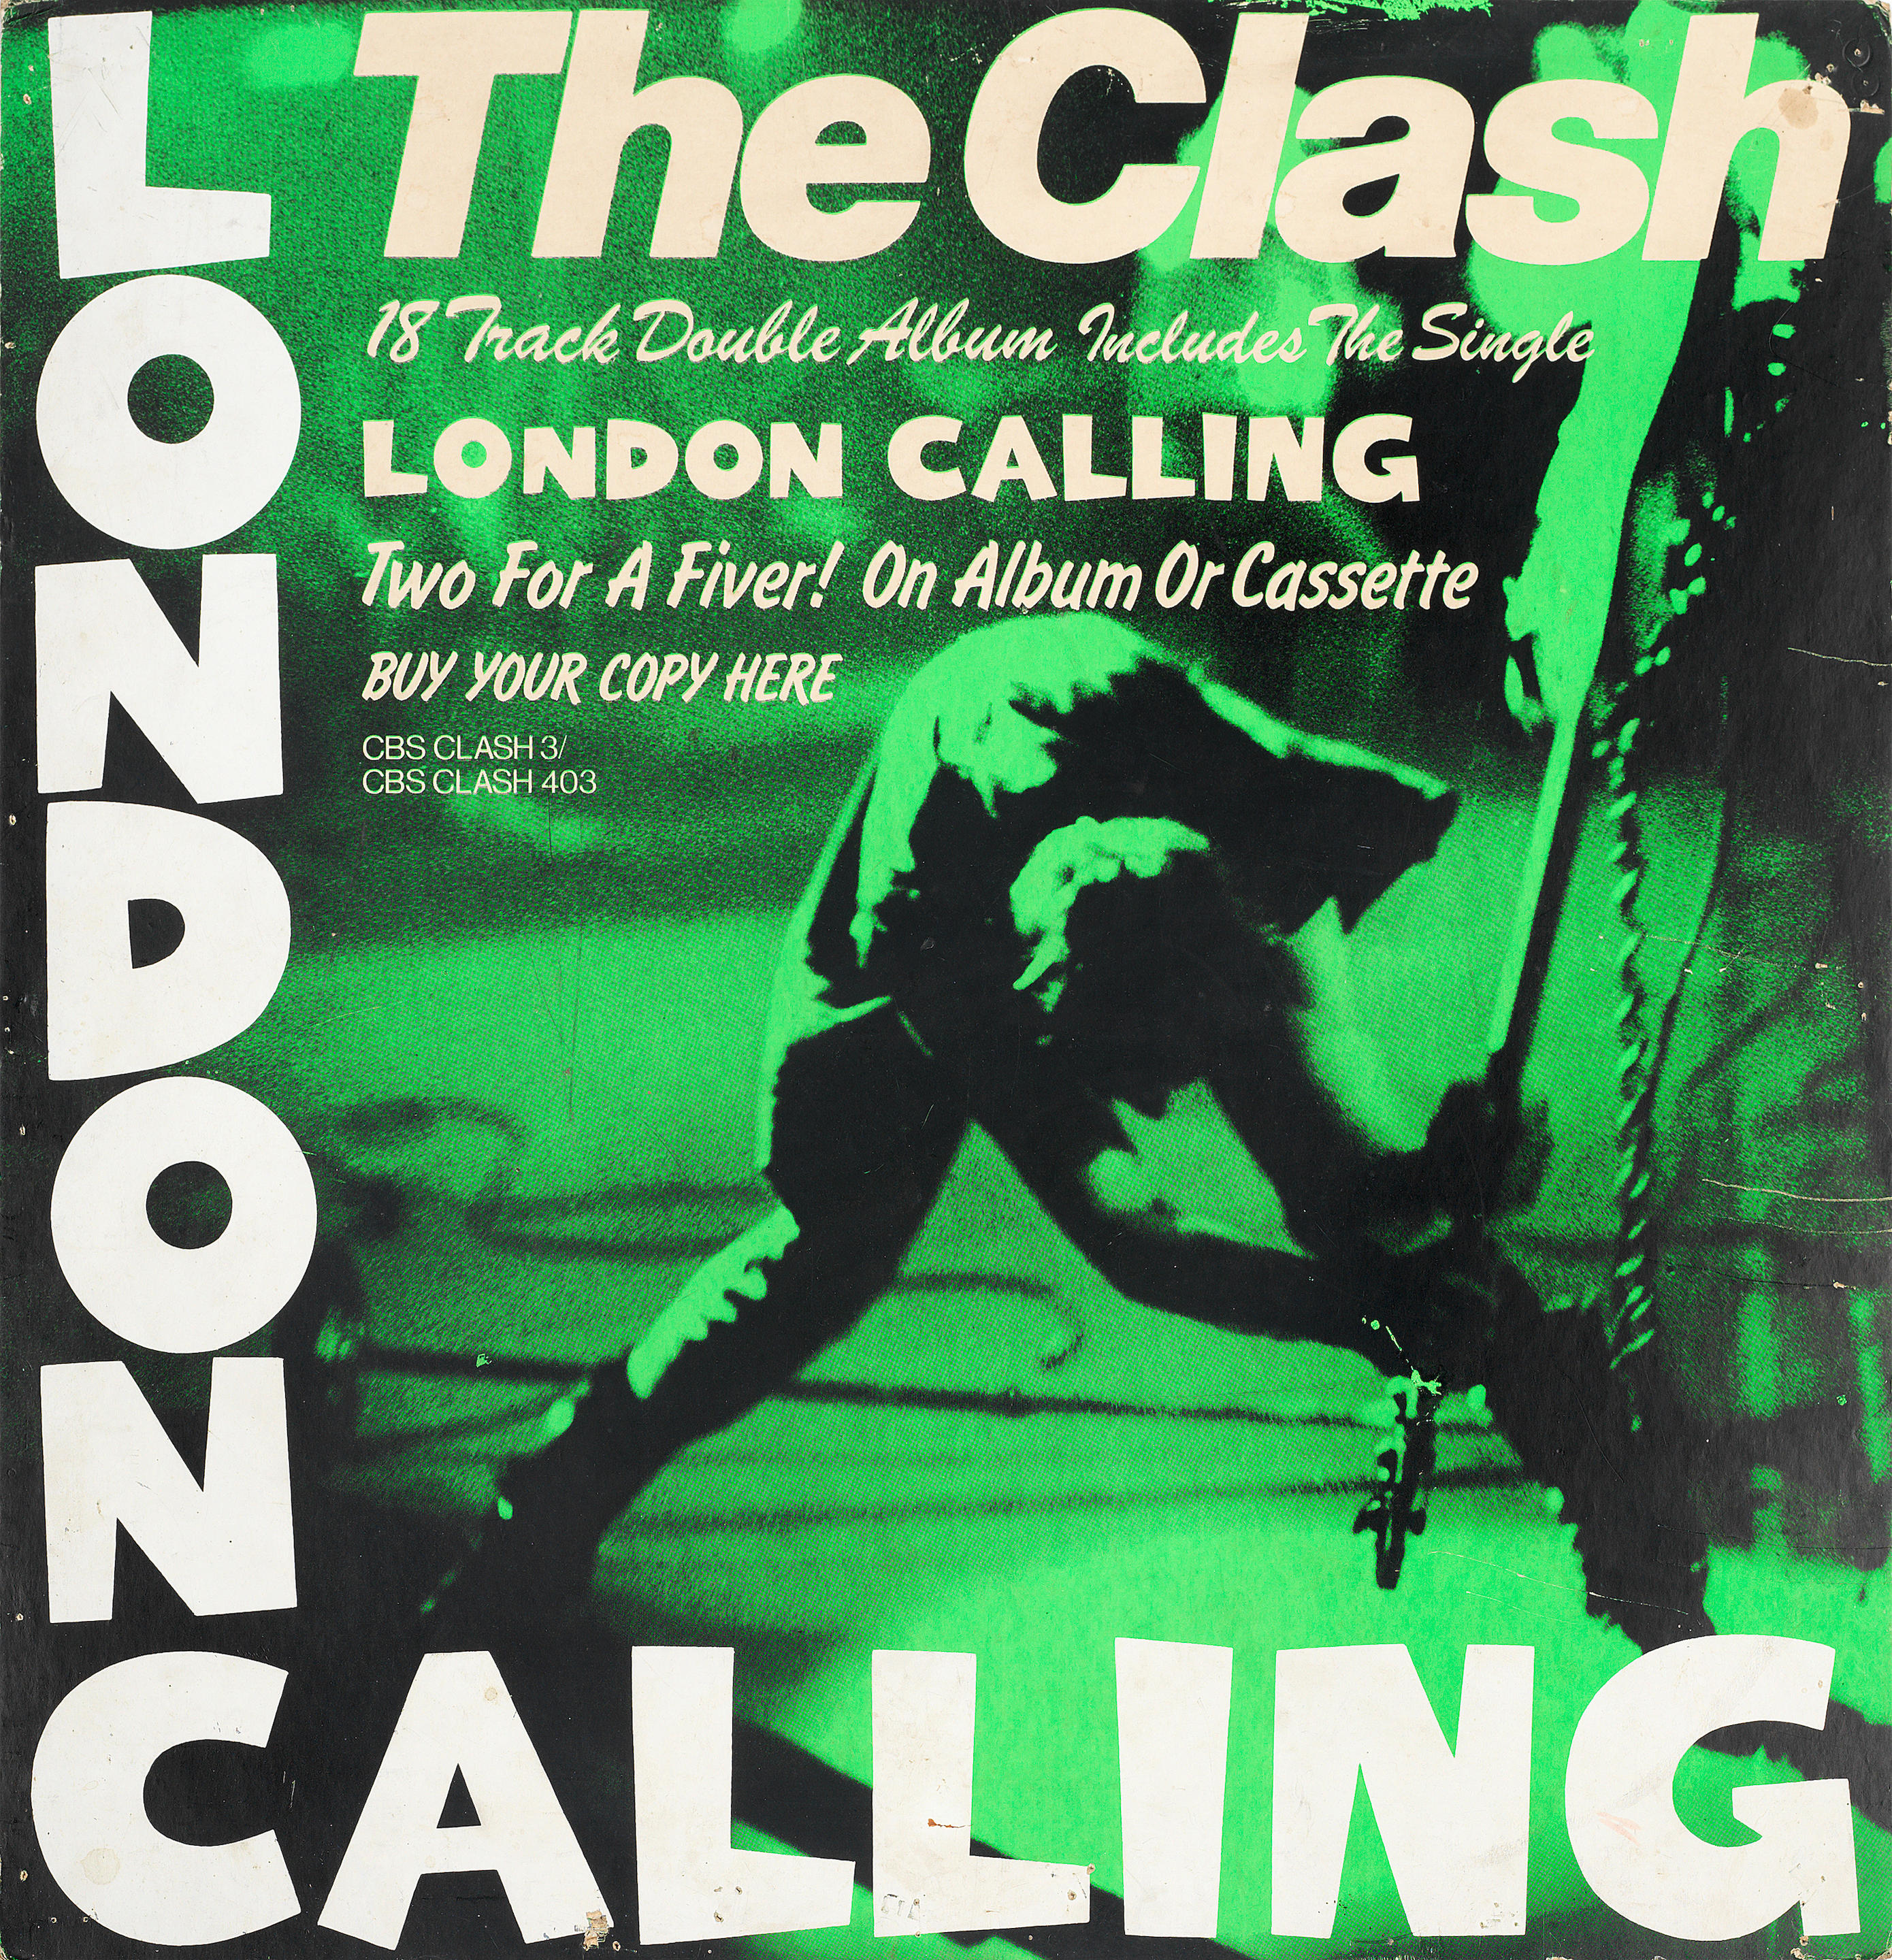 Punk Rock: Promo boards for The Clash album, 'London Calling' and...